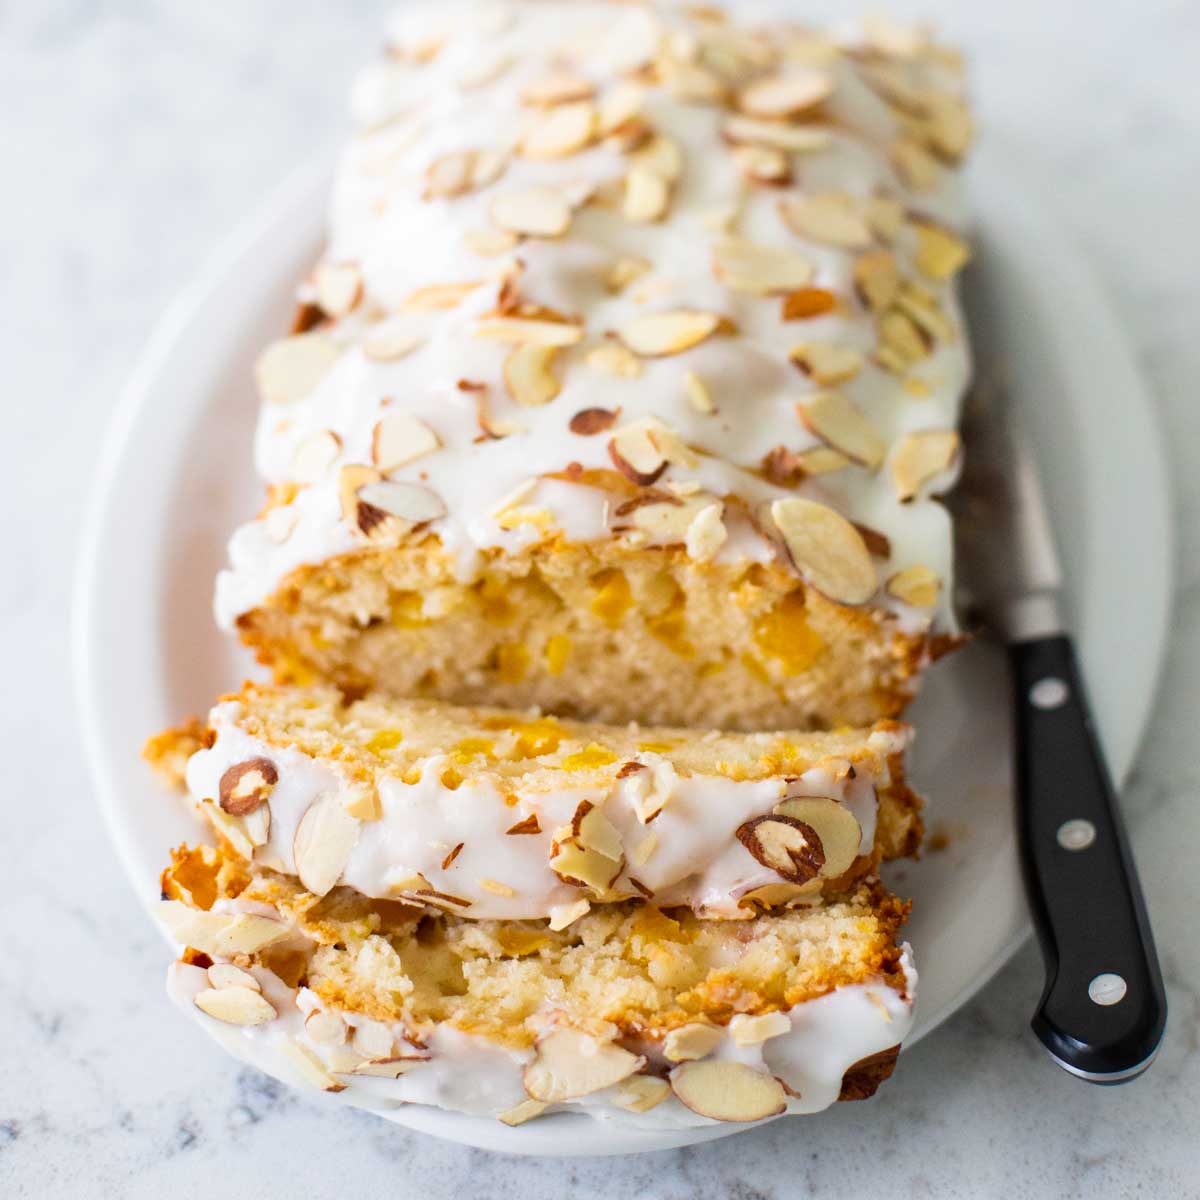 The baked peach bread with almond glaze and toasted almond slivers has been sliced so you can see the fresh peaches inside.